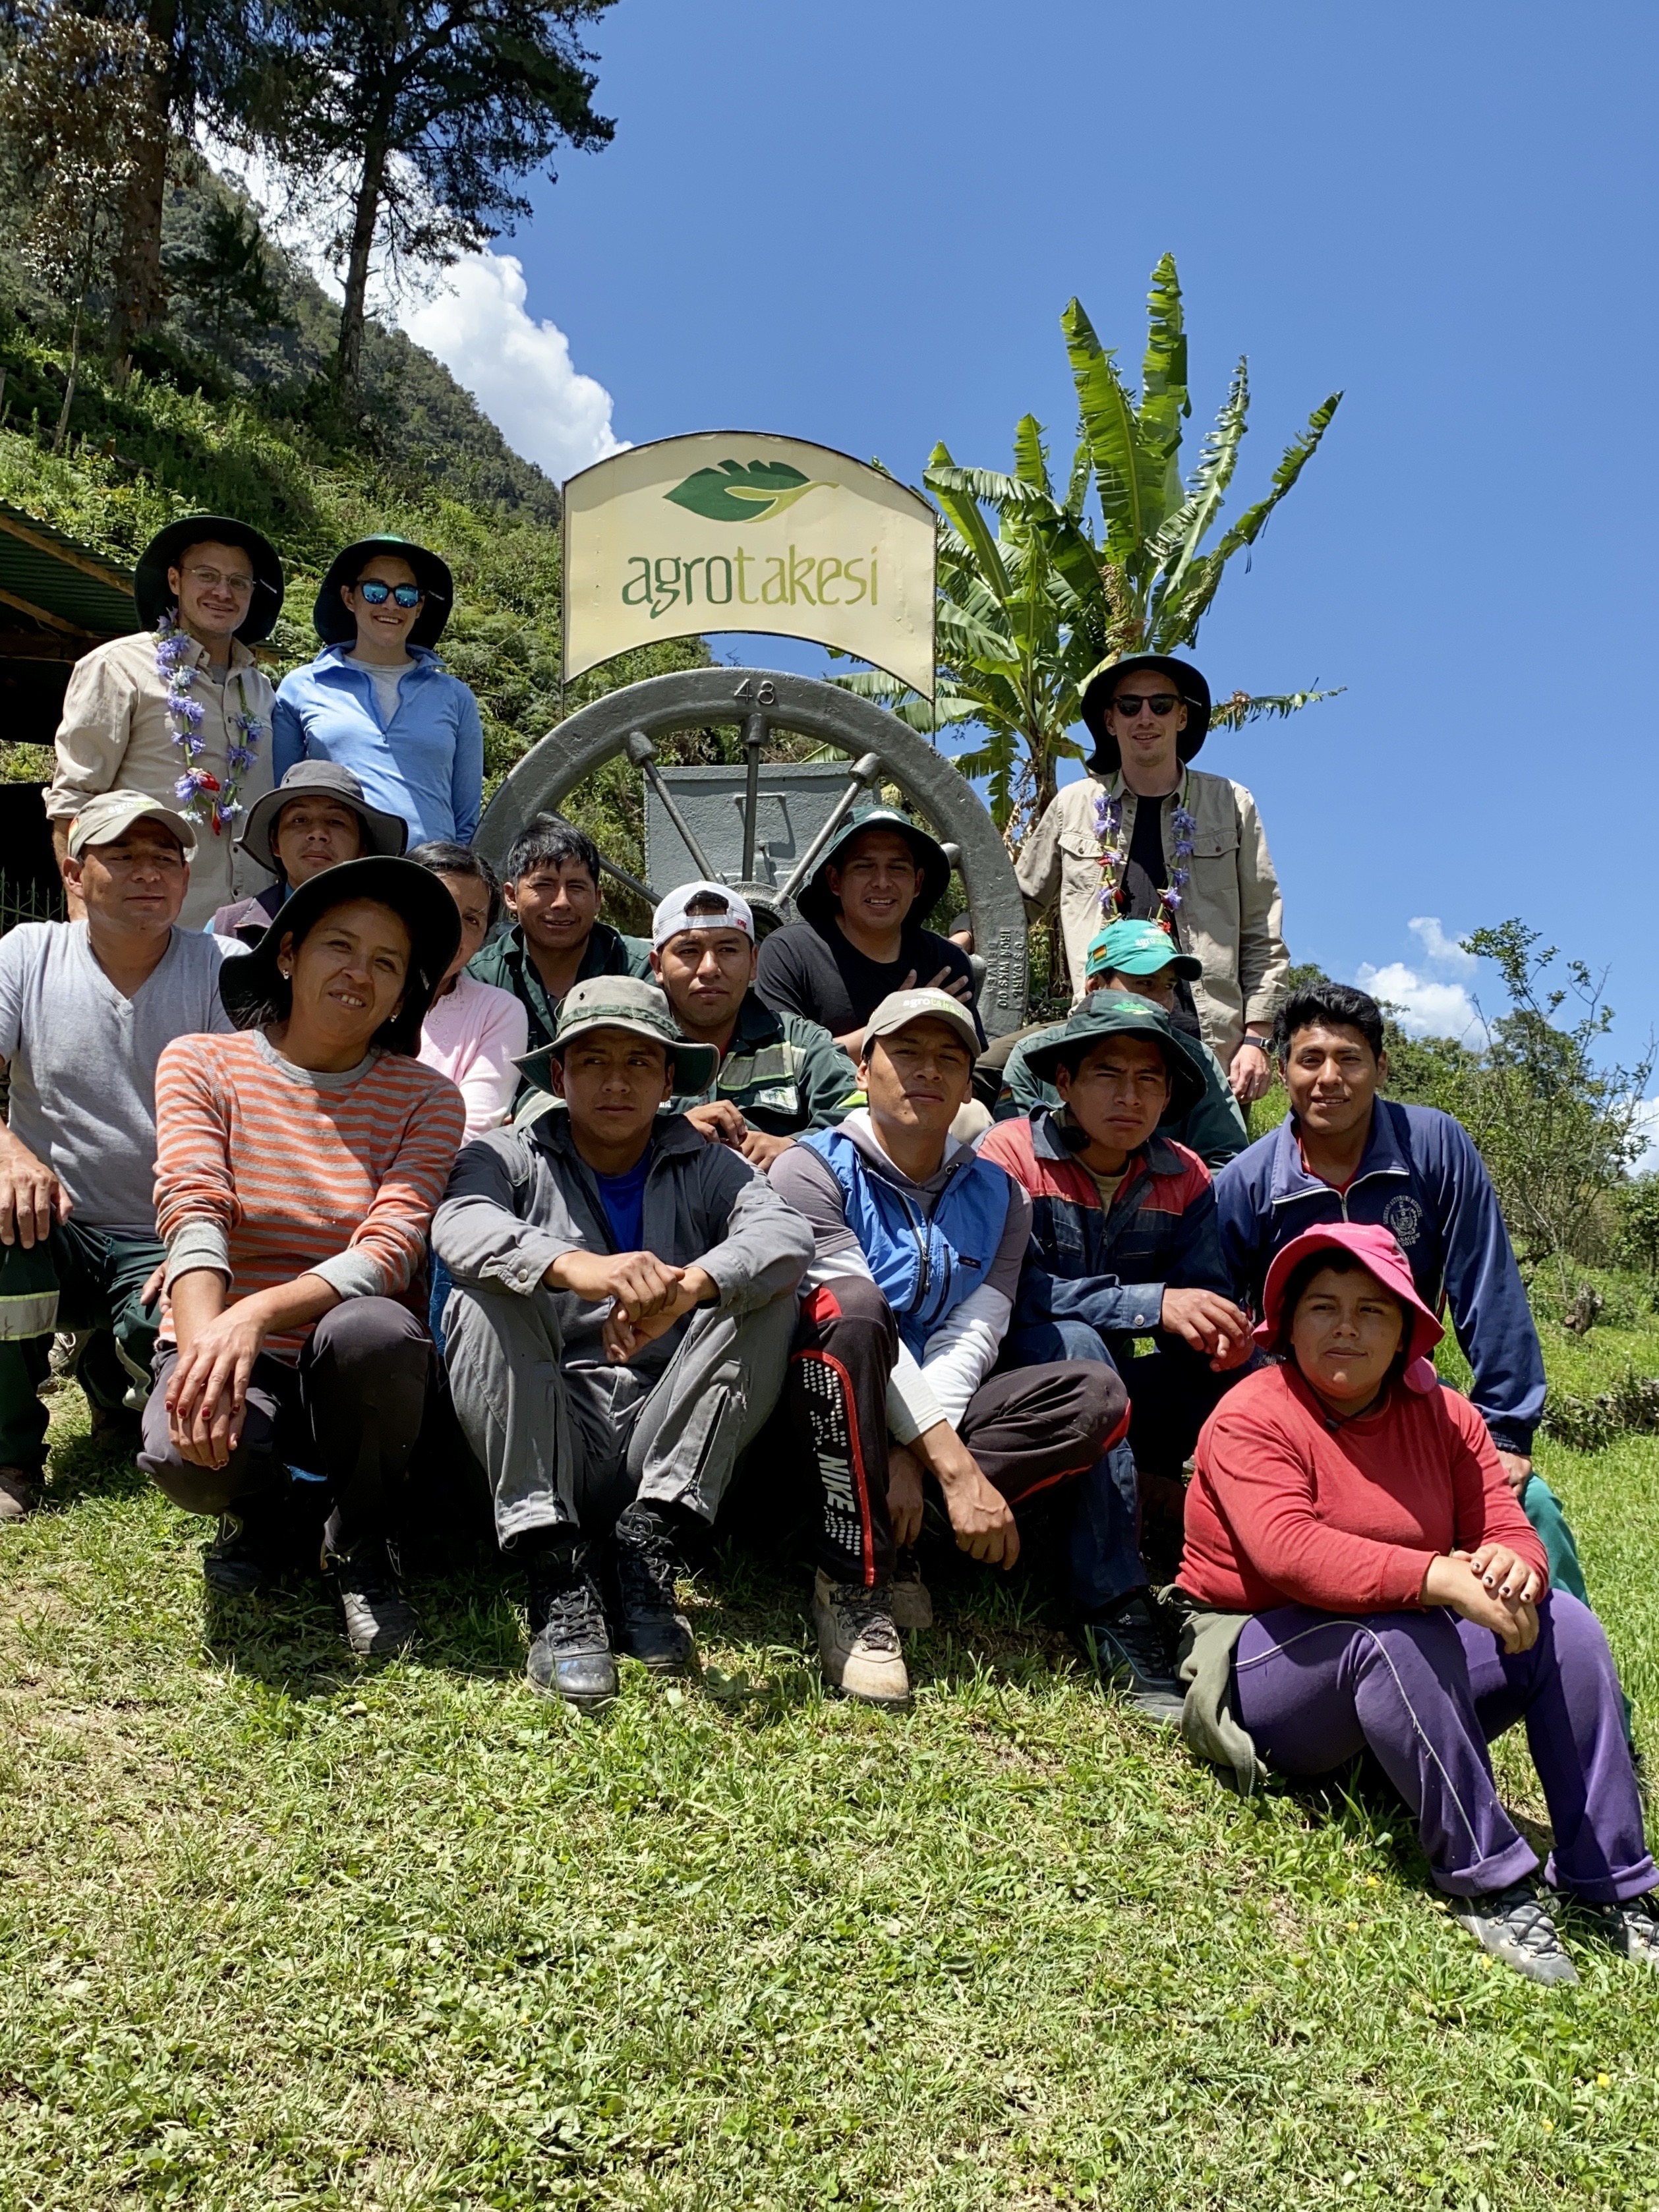 The permanently employed workers of Finca Takesi